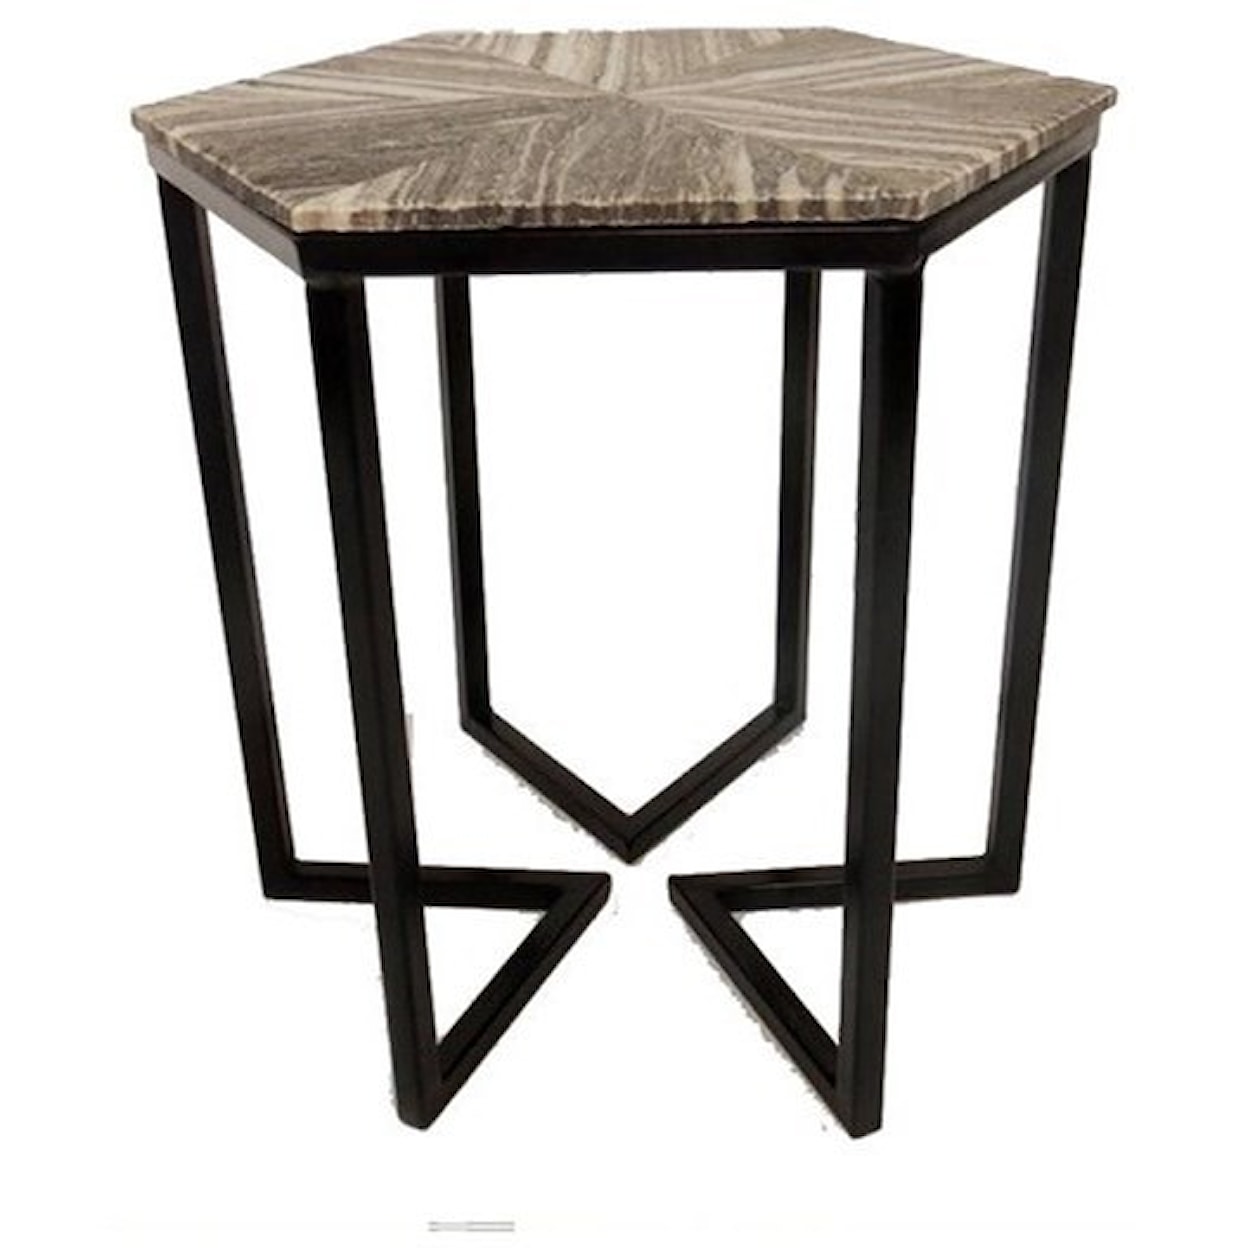 Crestview Collection Accent Furniture Bengal Manor Shaped Iron Base Hexagon Accent